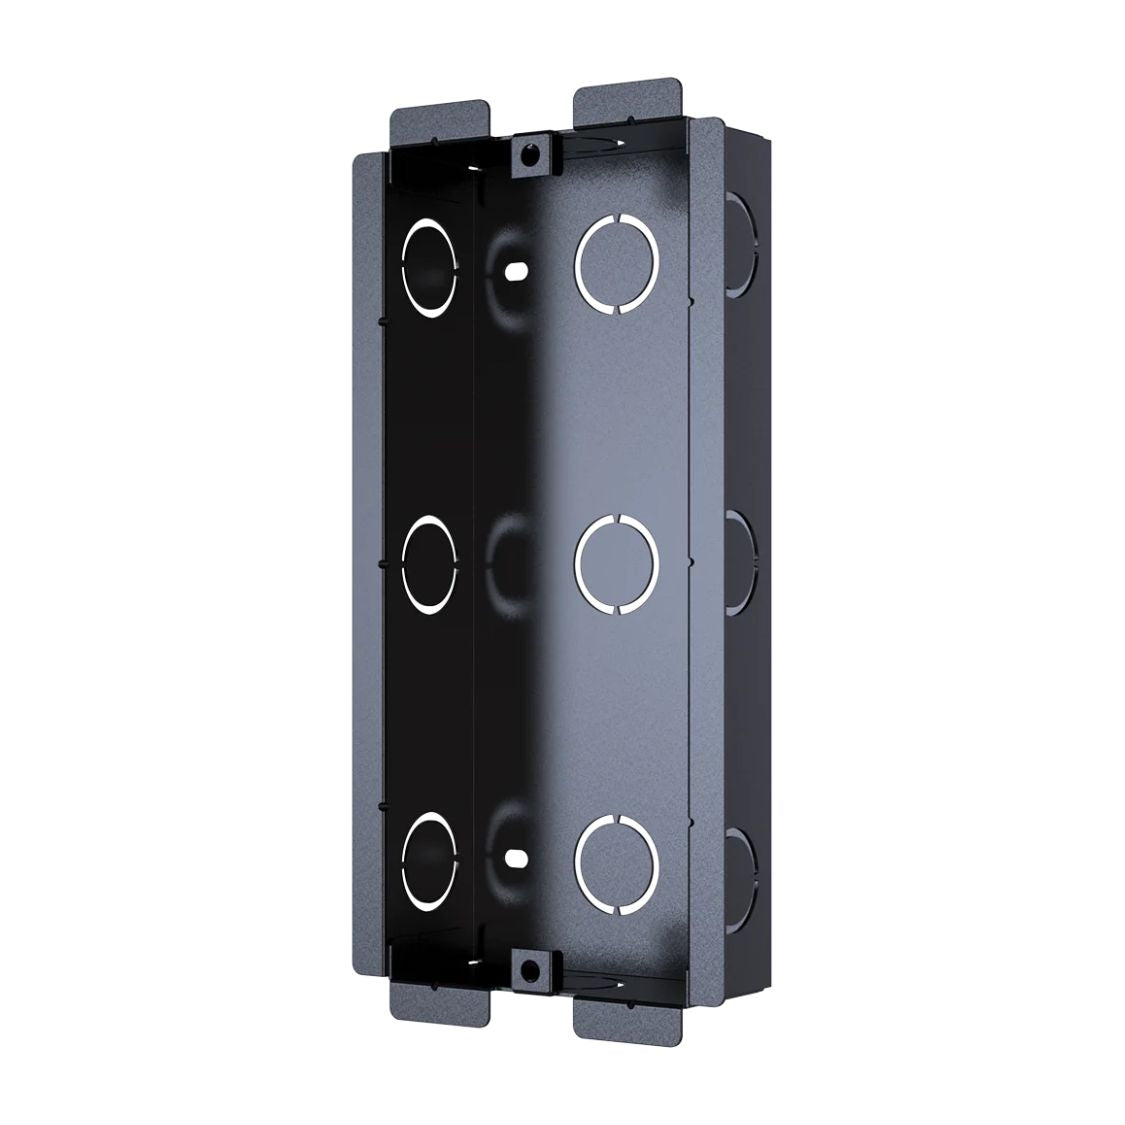 AKUVOX IN-WALL BOX FOR R20K